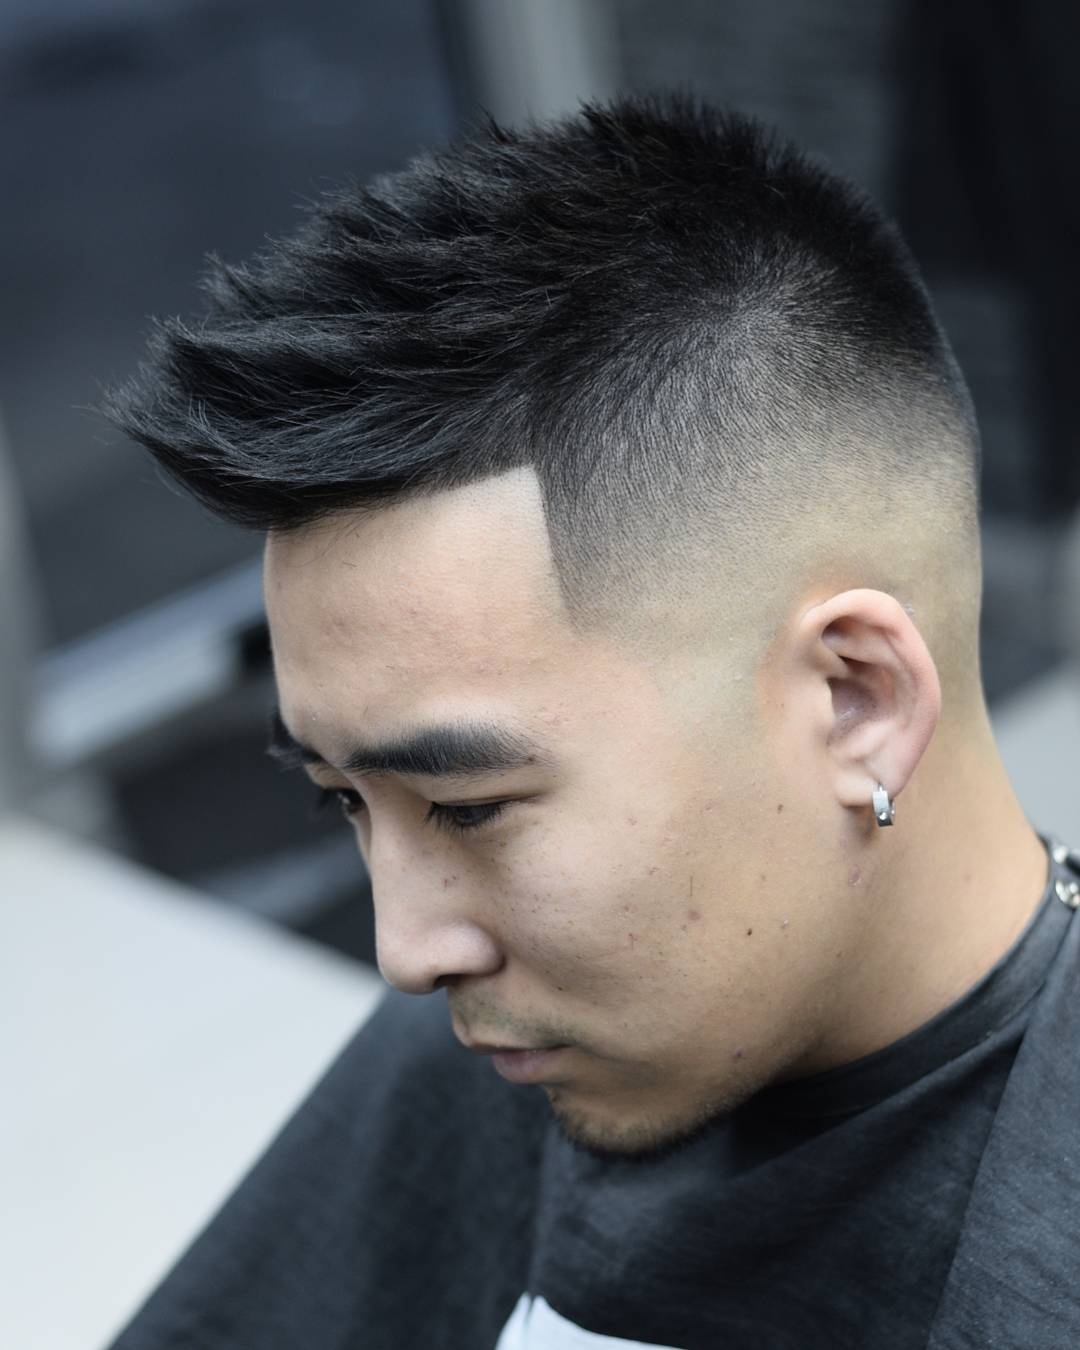 Best Hairstyles For Asian Men inside Asian Hairstyles Short Hair